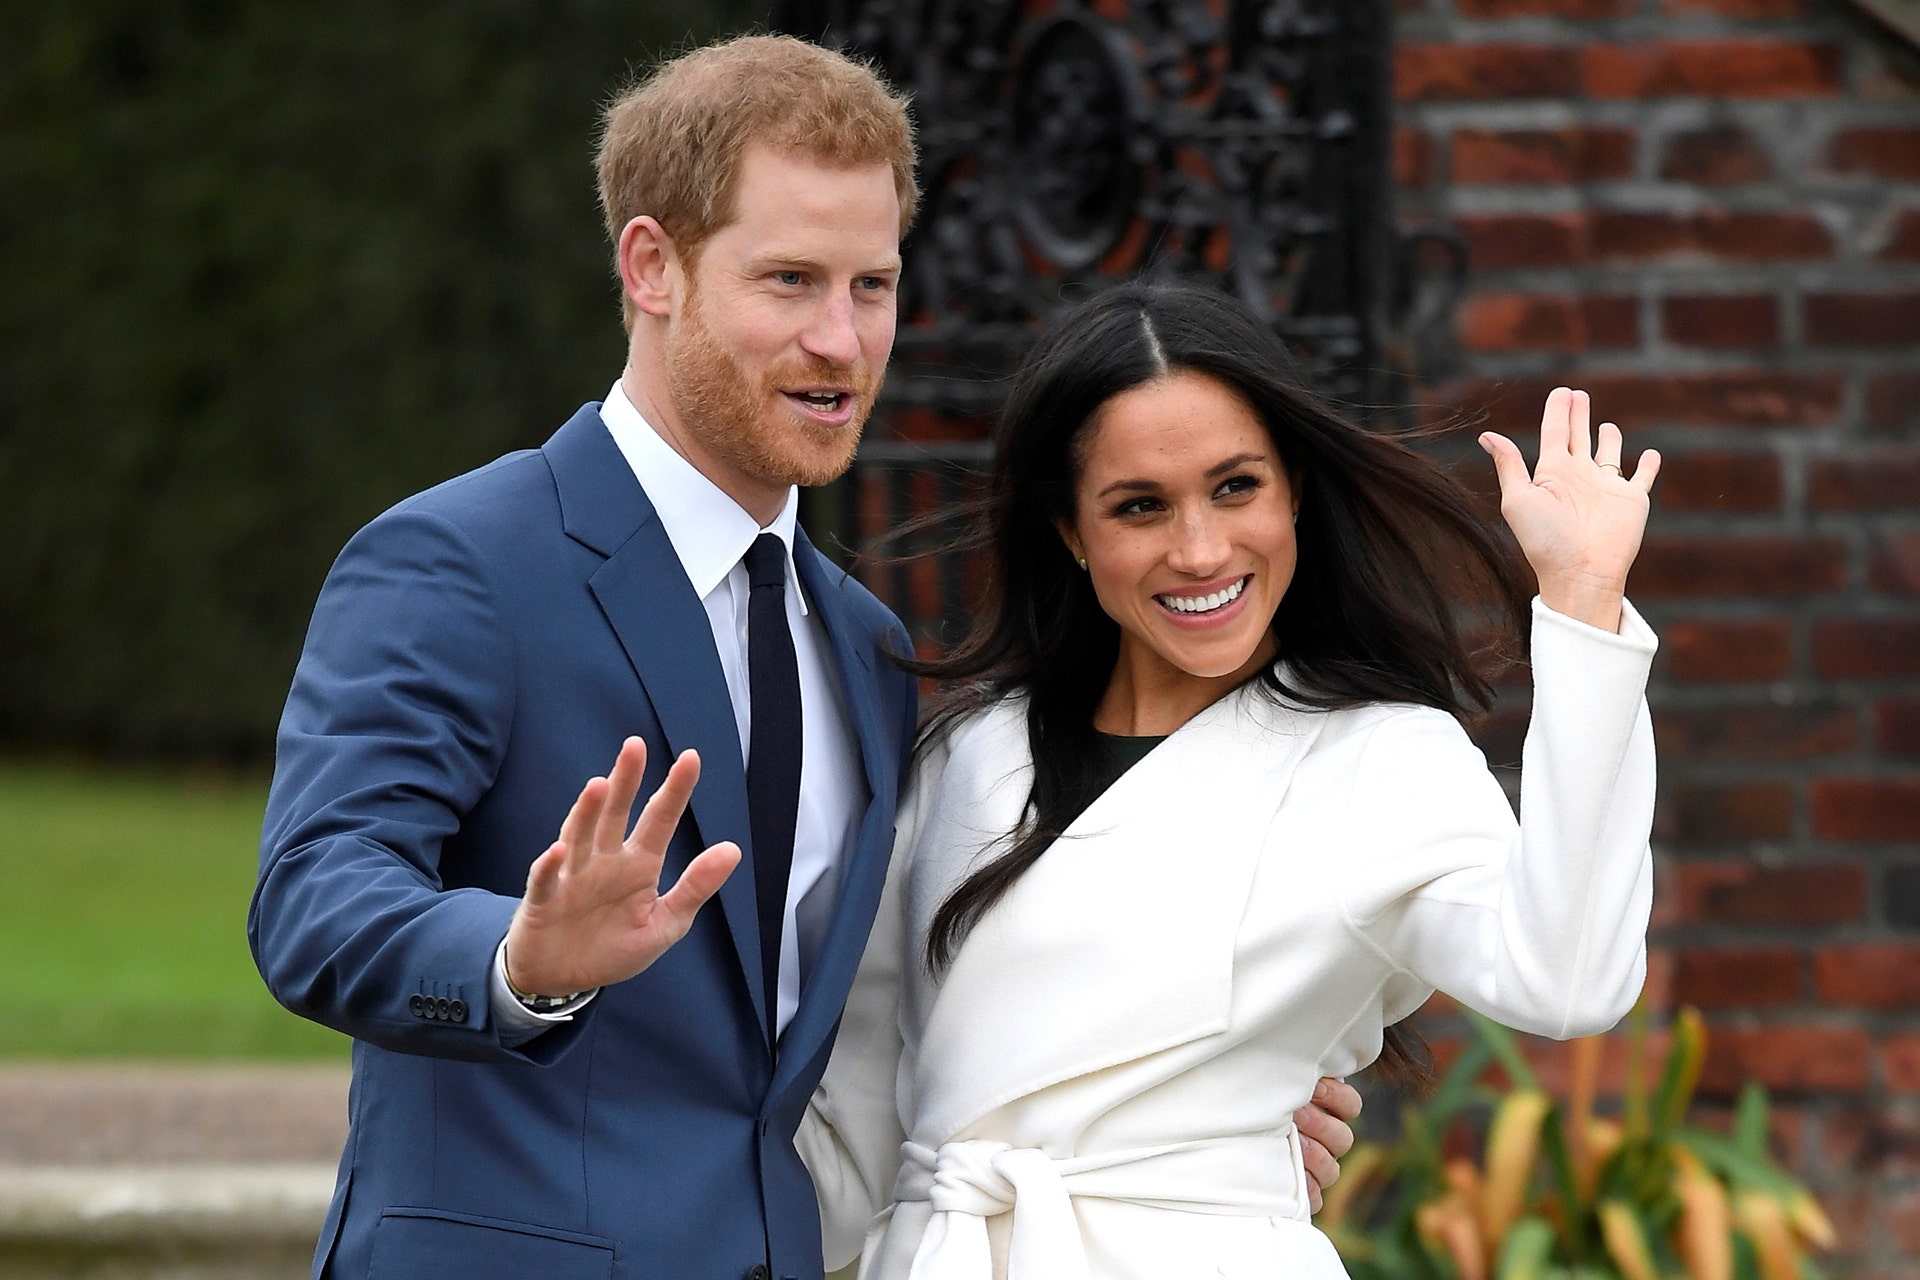 Meghan Markle, Prince Harry did not consult the palace courtiers before agreeing to Oprah’s interview: source